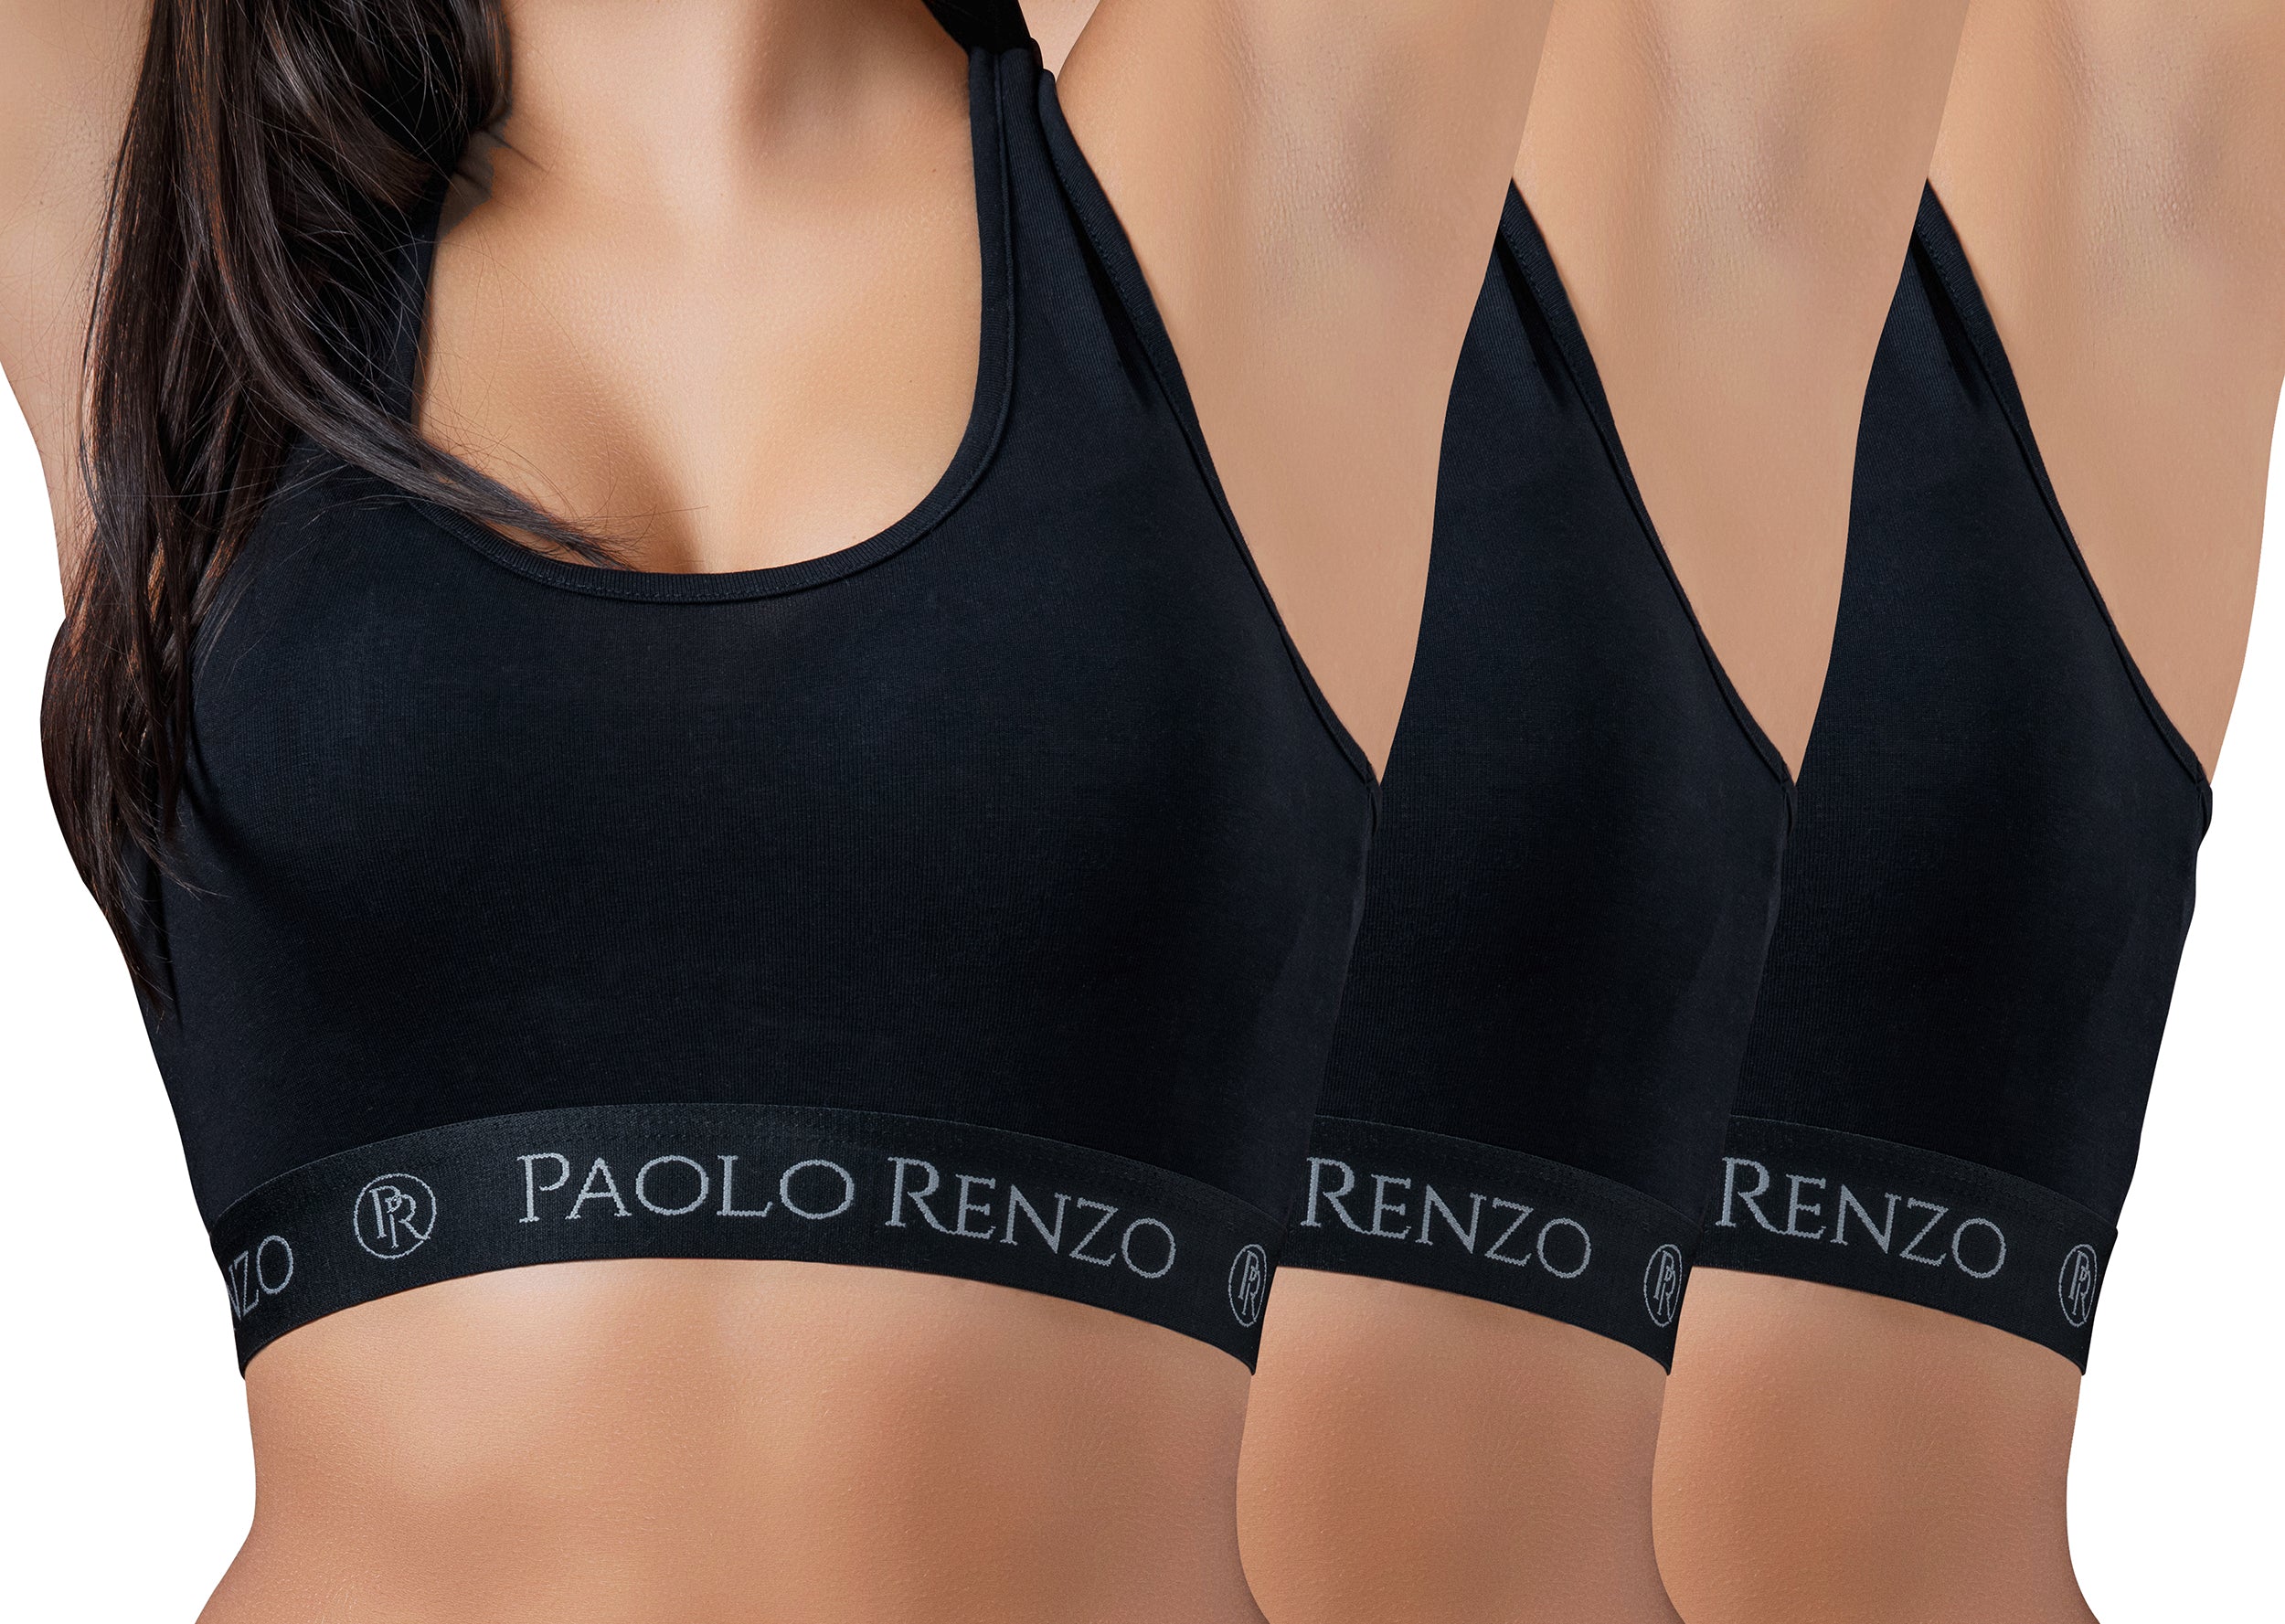 Paolo Renzo® women's cotton bustier SPORT LINE 3 or 6 pairs